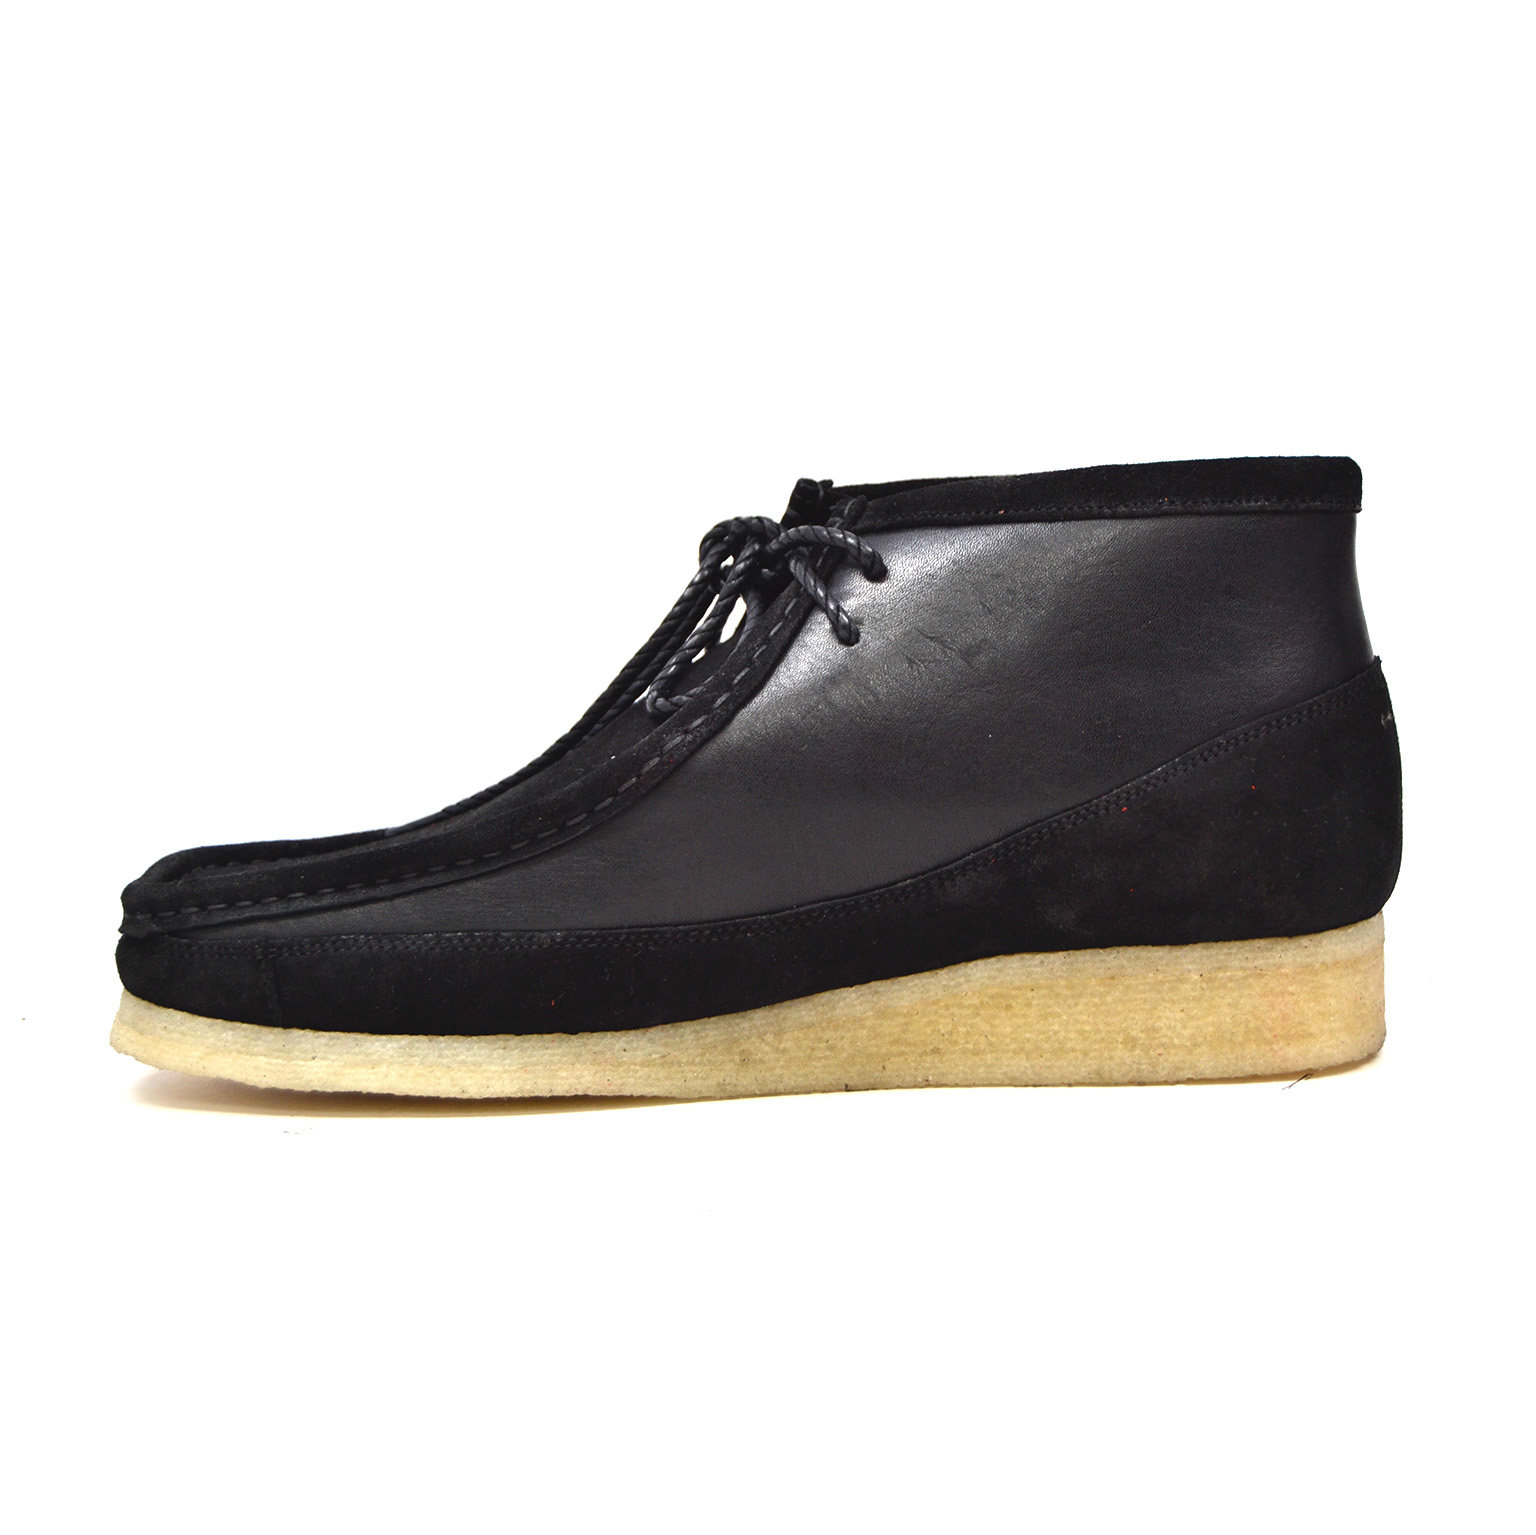 British Collection Walkers-Black Leather and Suede [100100-01] - $170. ...